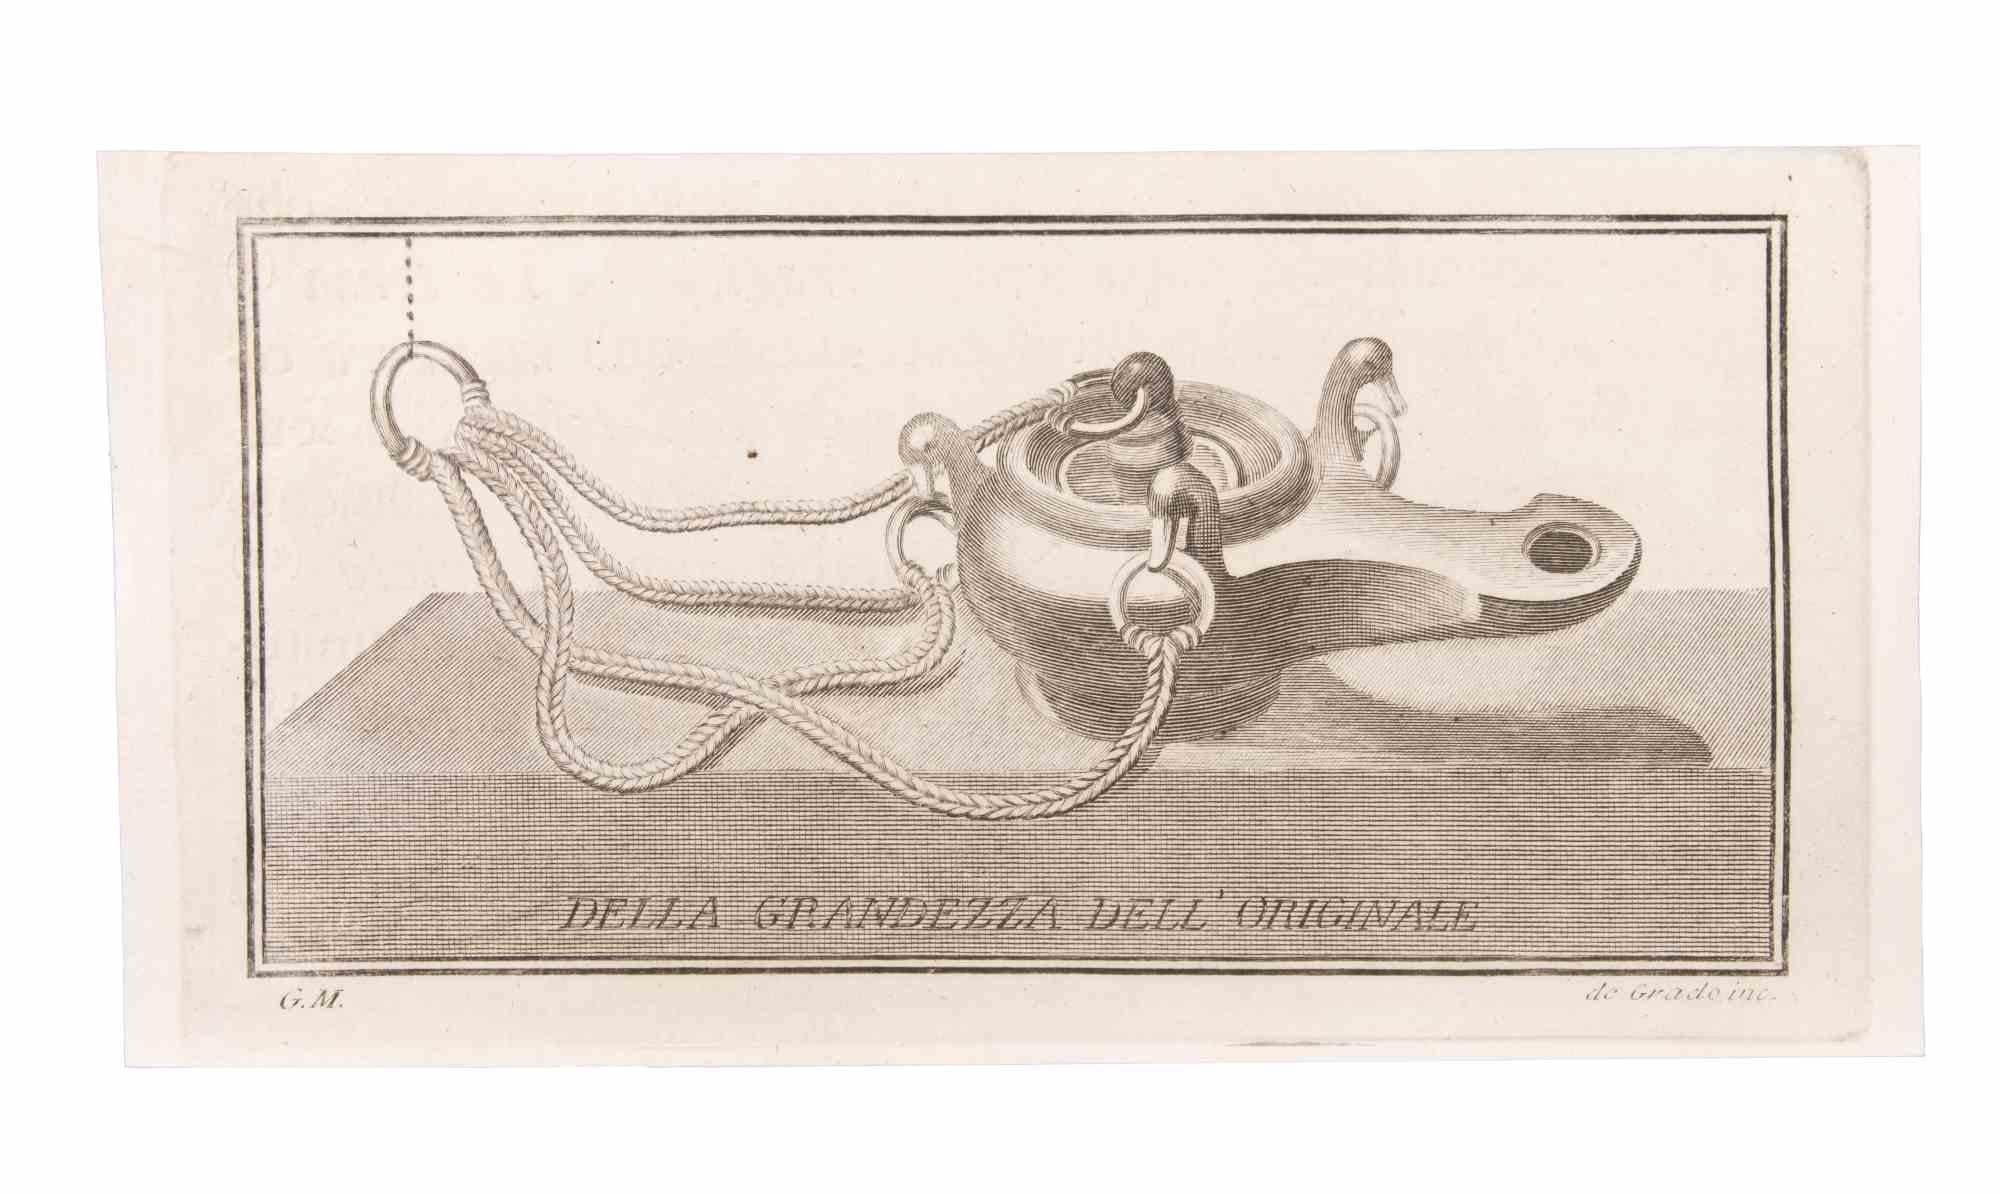 Oil Lamp to Hang is an Etching realized by  Filippo de Grado (1705-1780).

The etching belongs to the print suite “Antiquities of Herculaneum Exposed” (original title: “Le Antichità di Ercolano Esposte”), an eight-volume volume of engravings of the